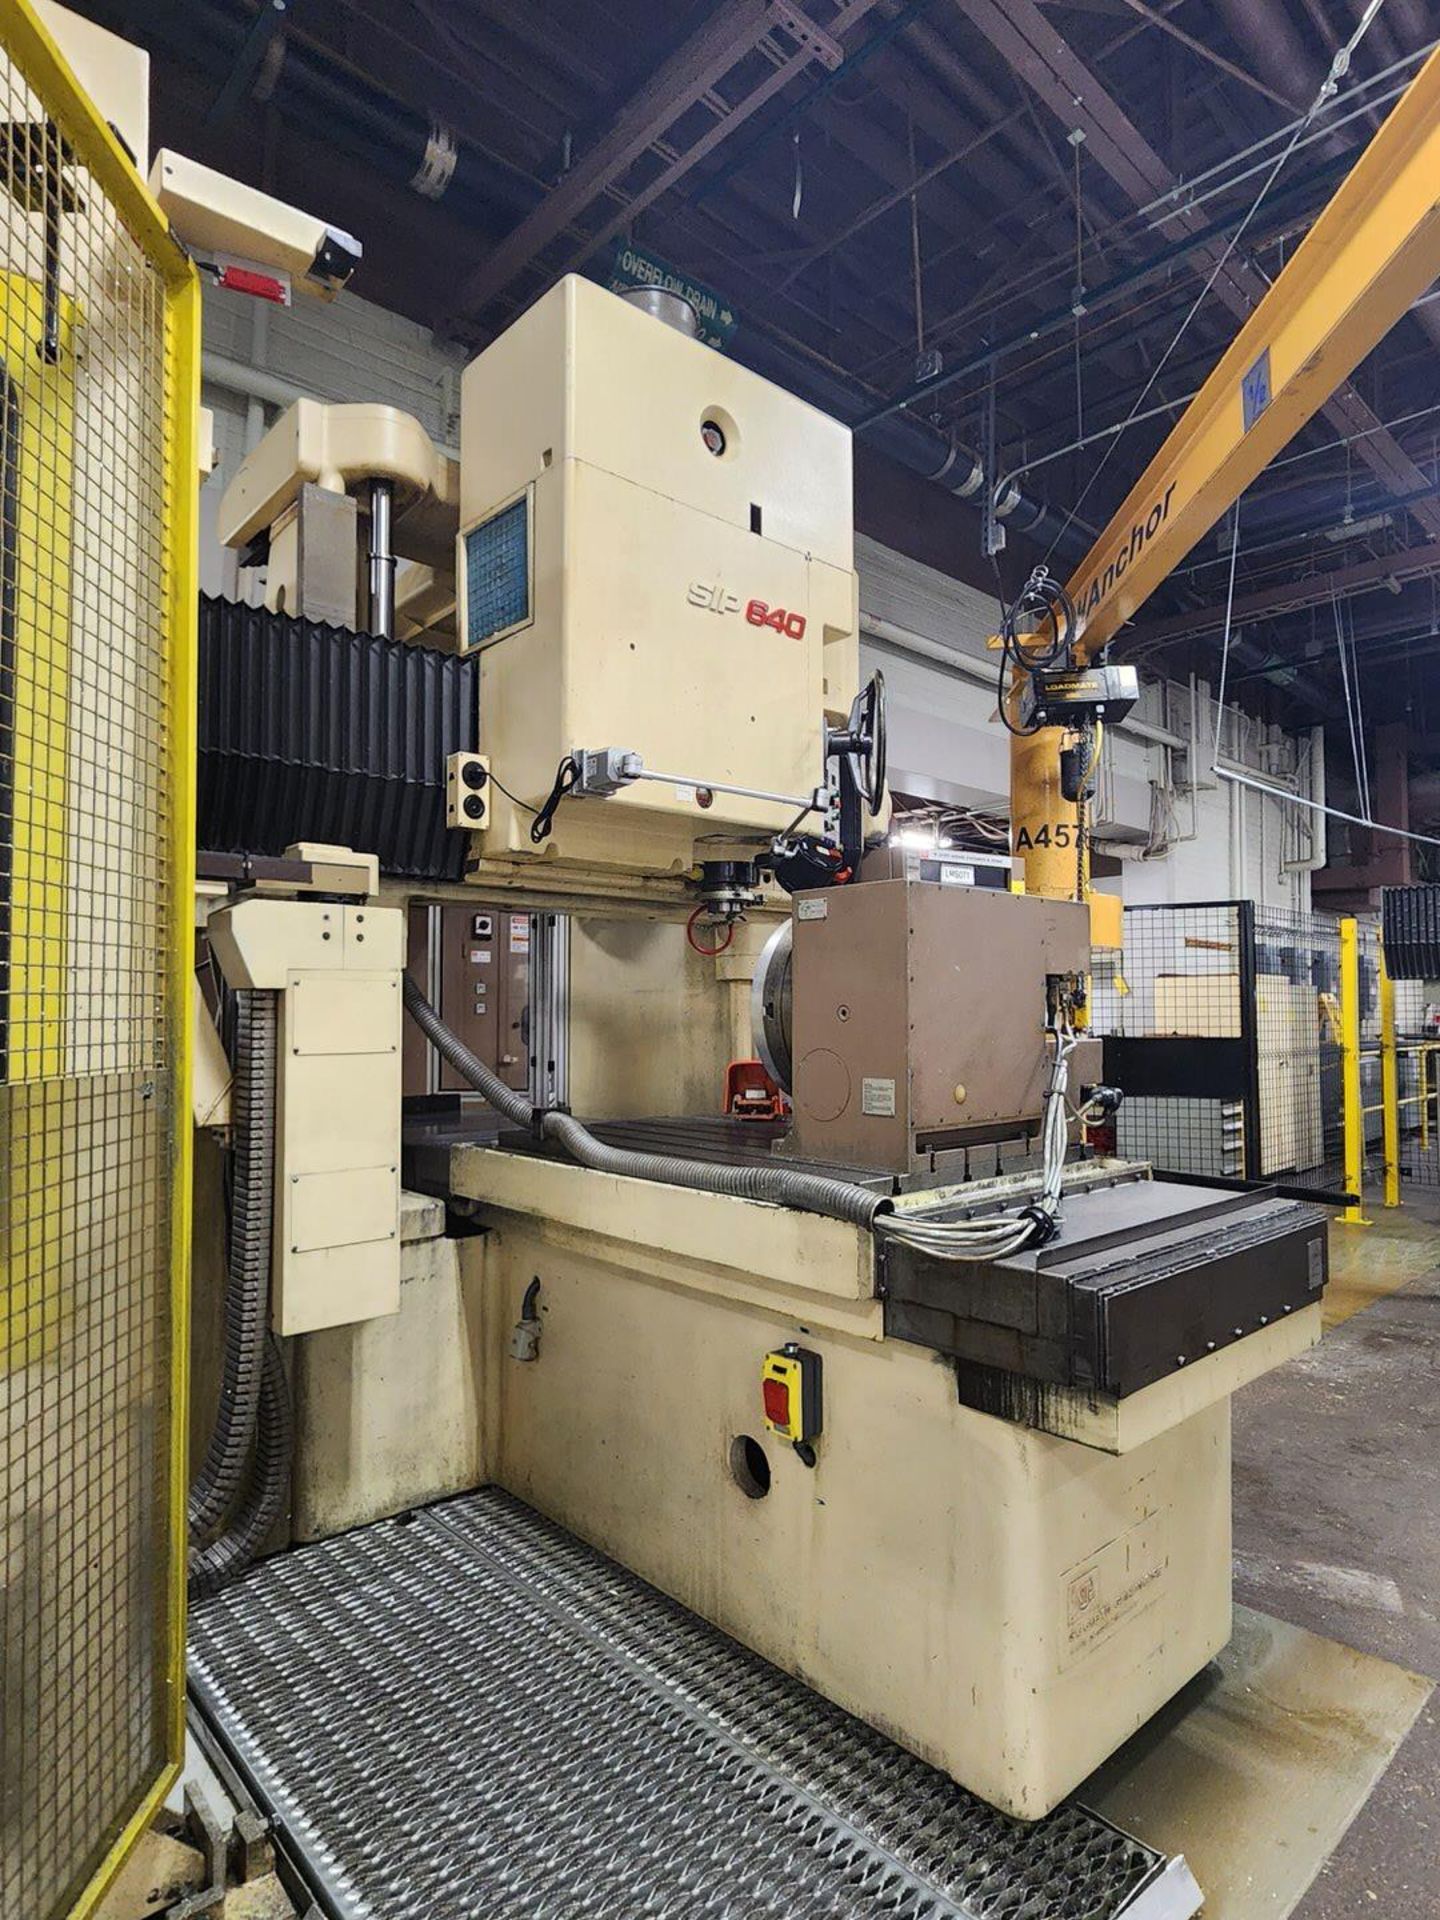 SIP SIP-640 Jig Boring Machine W/ Fanuc Series 16i-M Controller; Cutting Time: 15,304hrs - Image 8 of 36